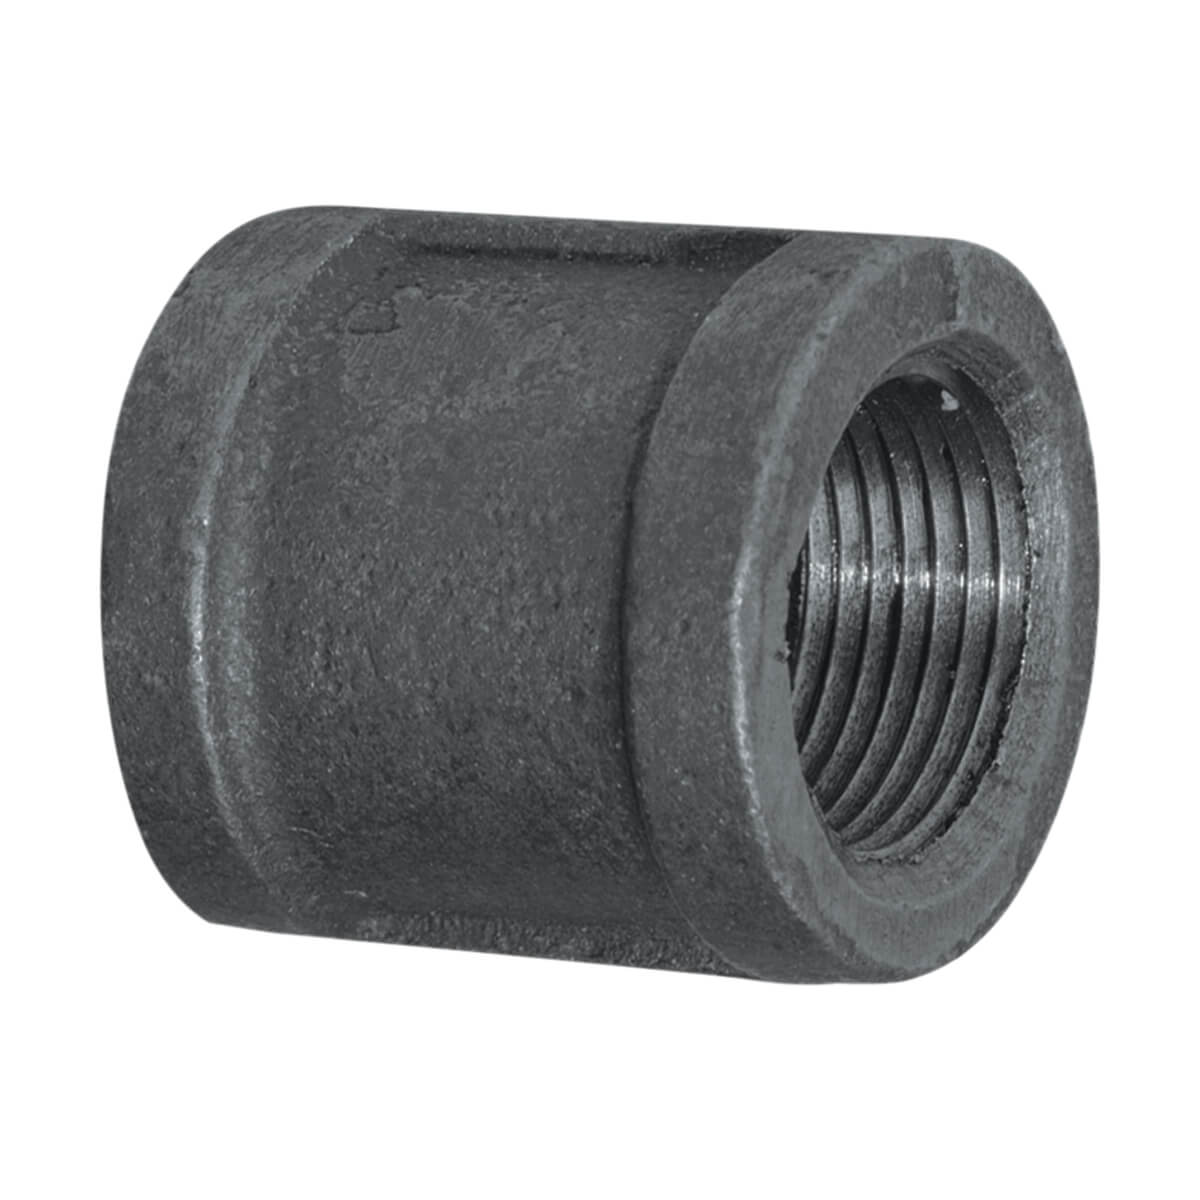 Fitting Black Iron Coupling - 3/4-in